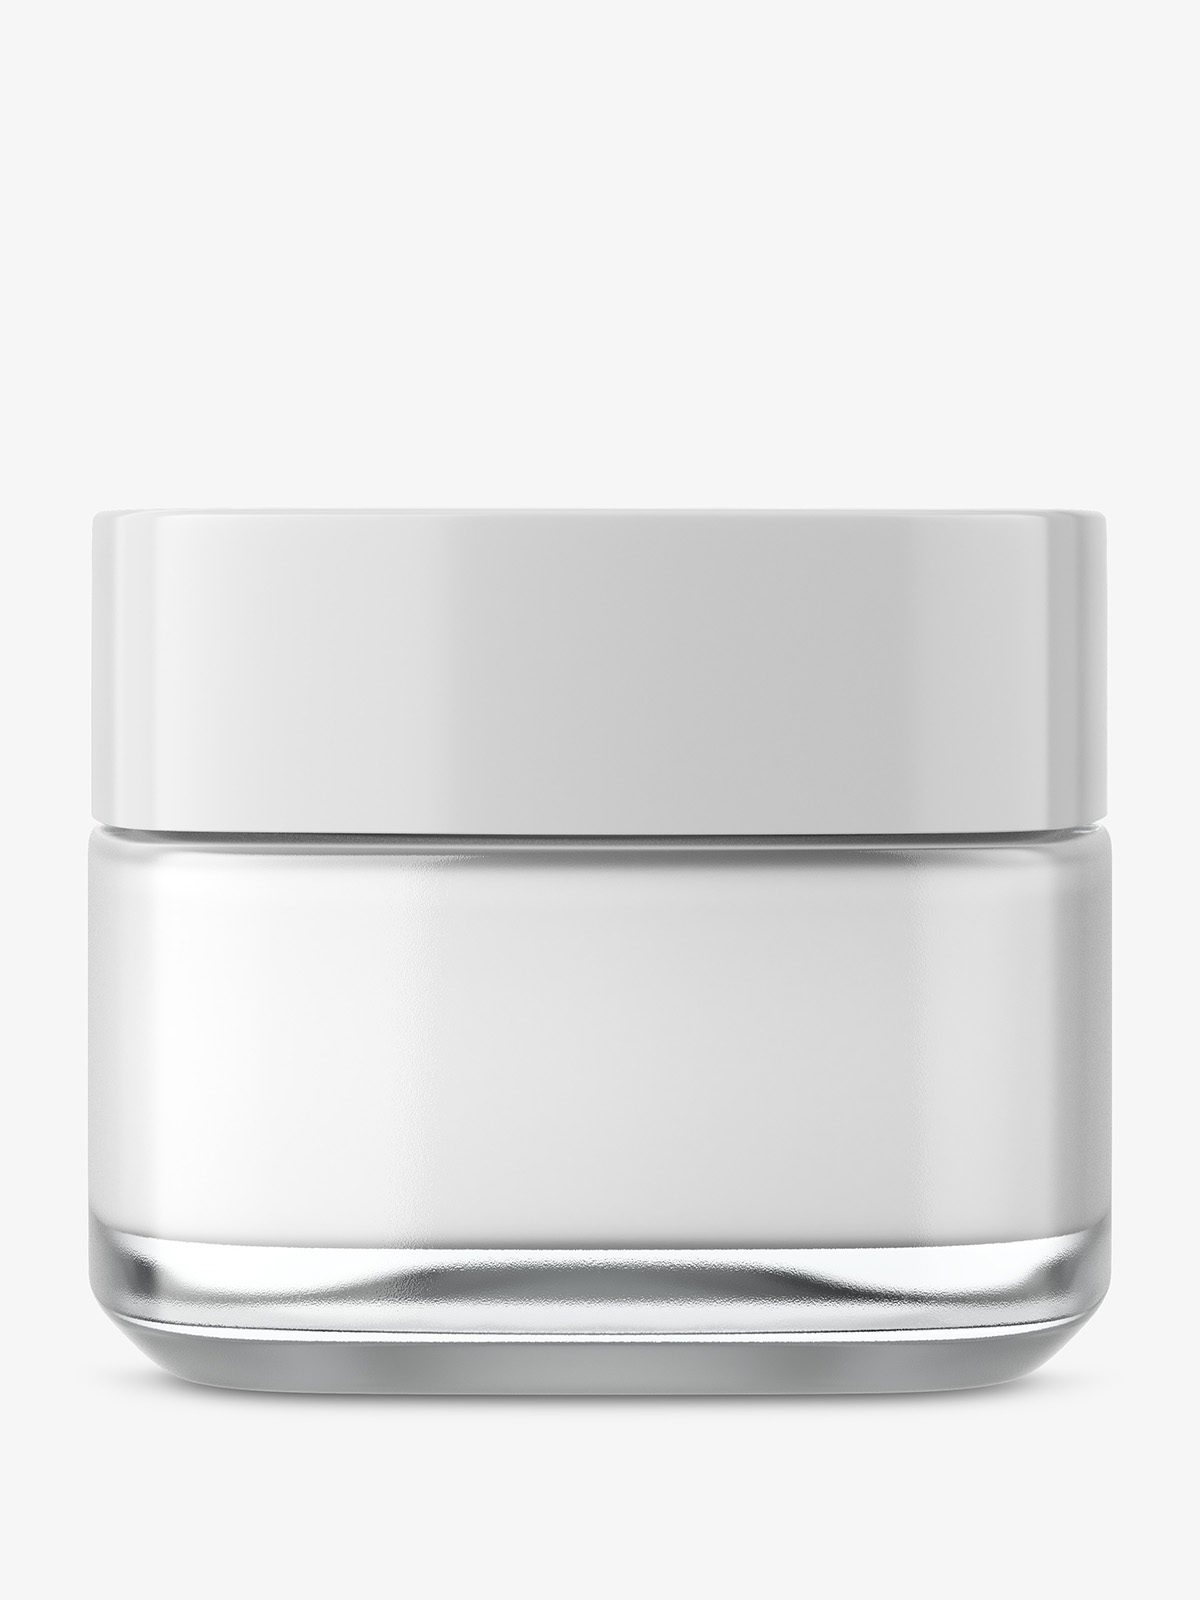 Download Square glass cosmetic jar - Smarty Mockups